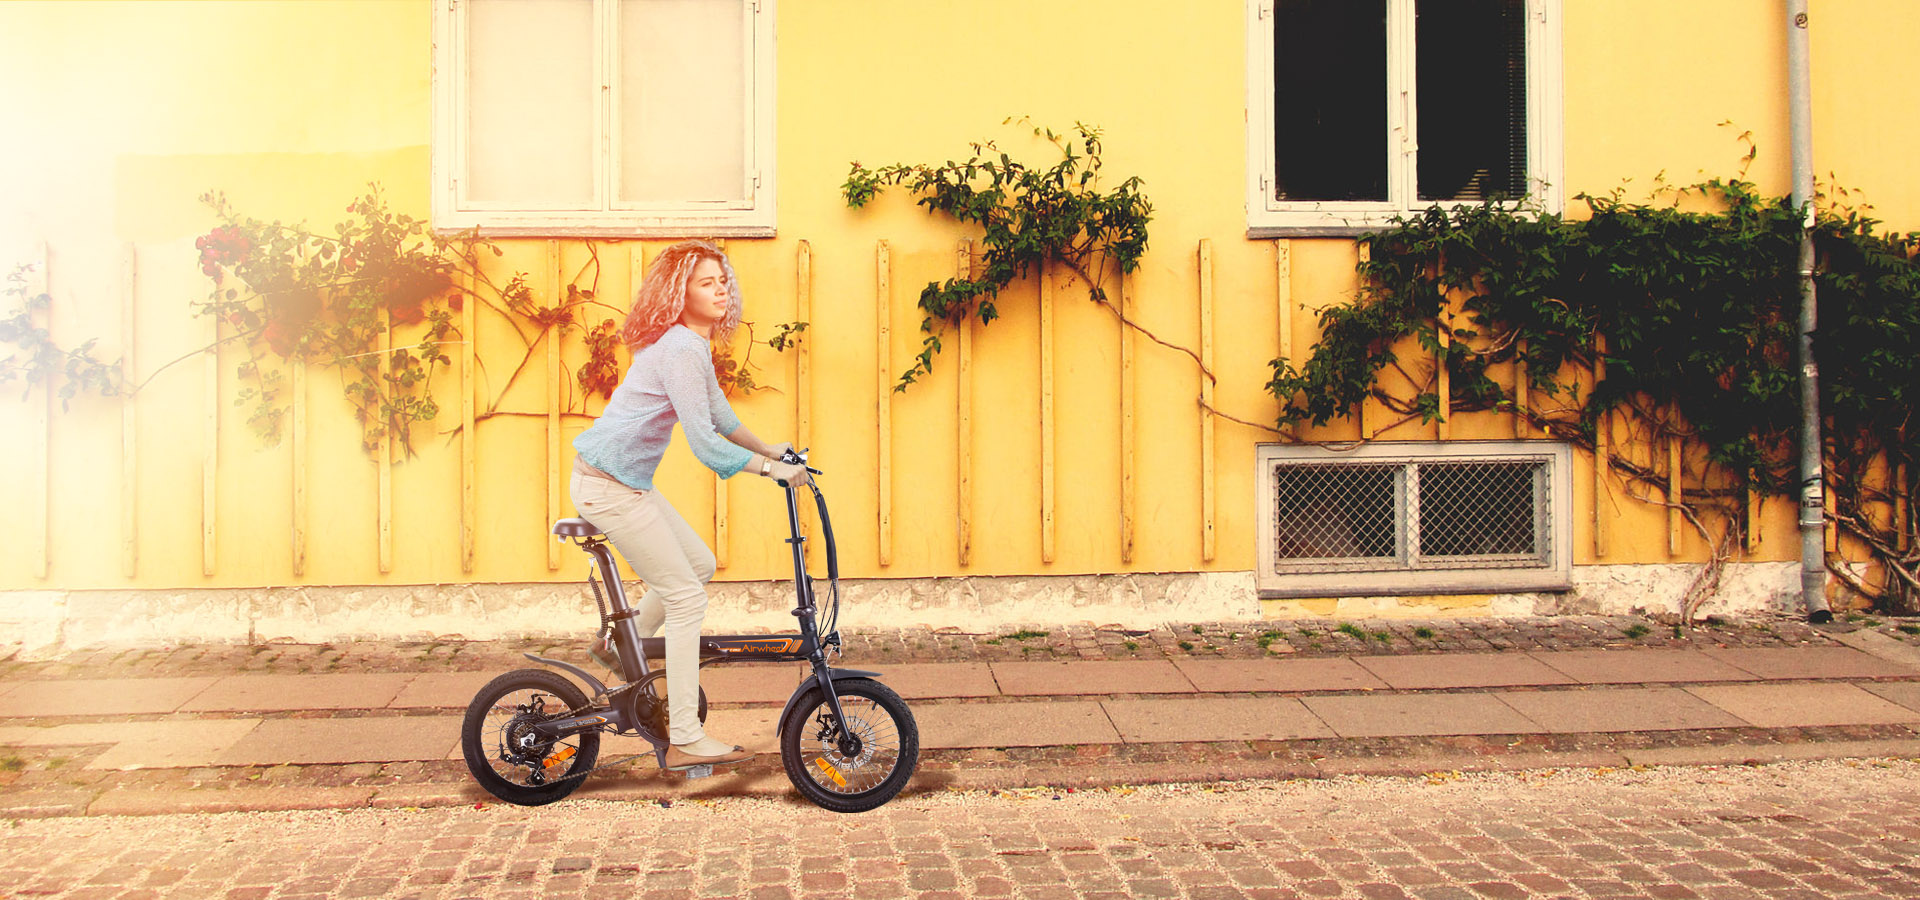 Airwheel R5 electric moped bicycle